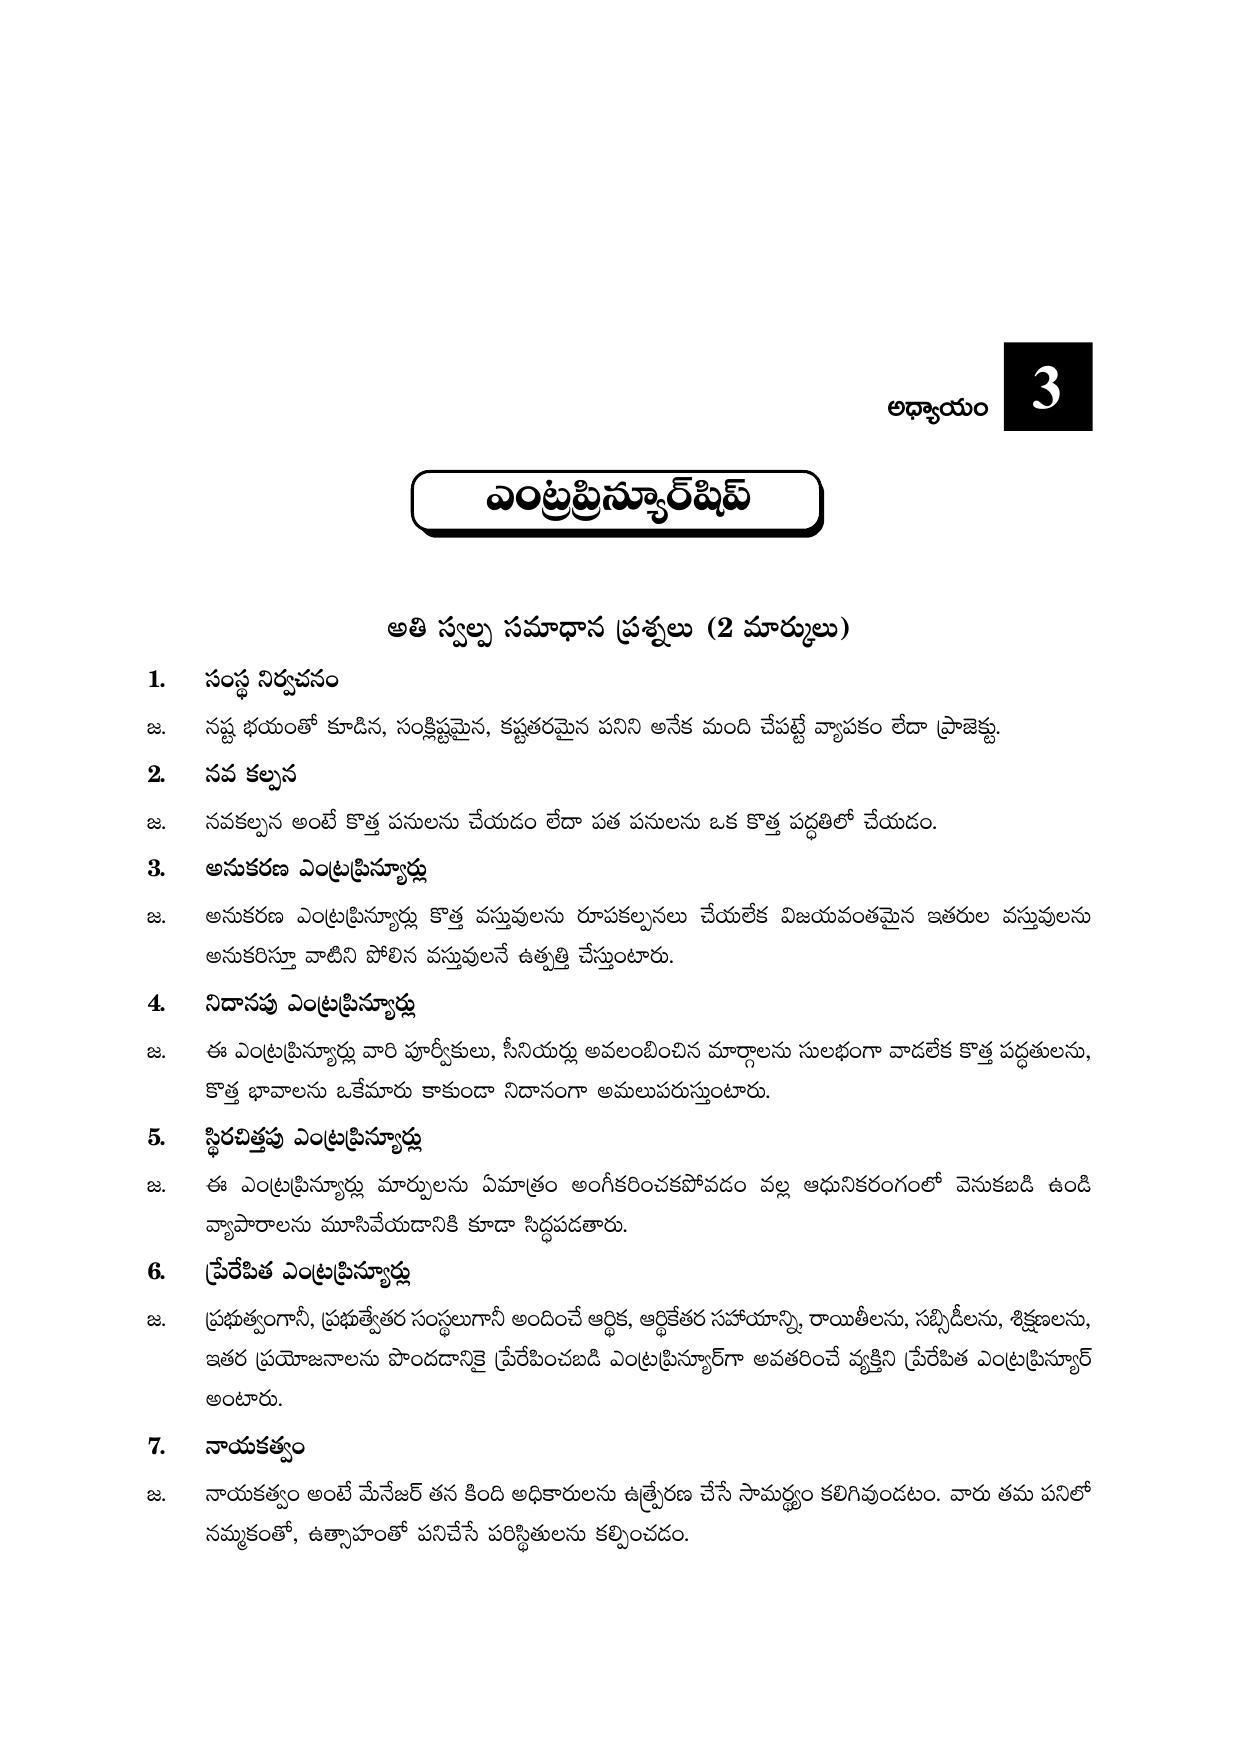 TS SCERT Inter 2nd Year Commerce &Accts II yr TM Path 1 (Telugu Medium) Text Book - Page 17